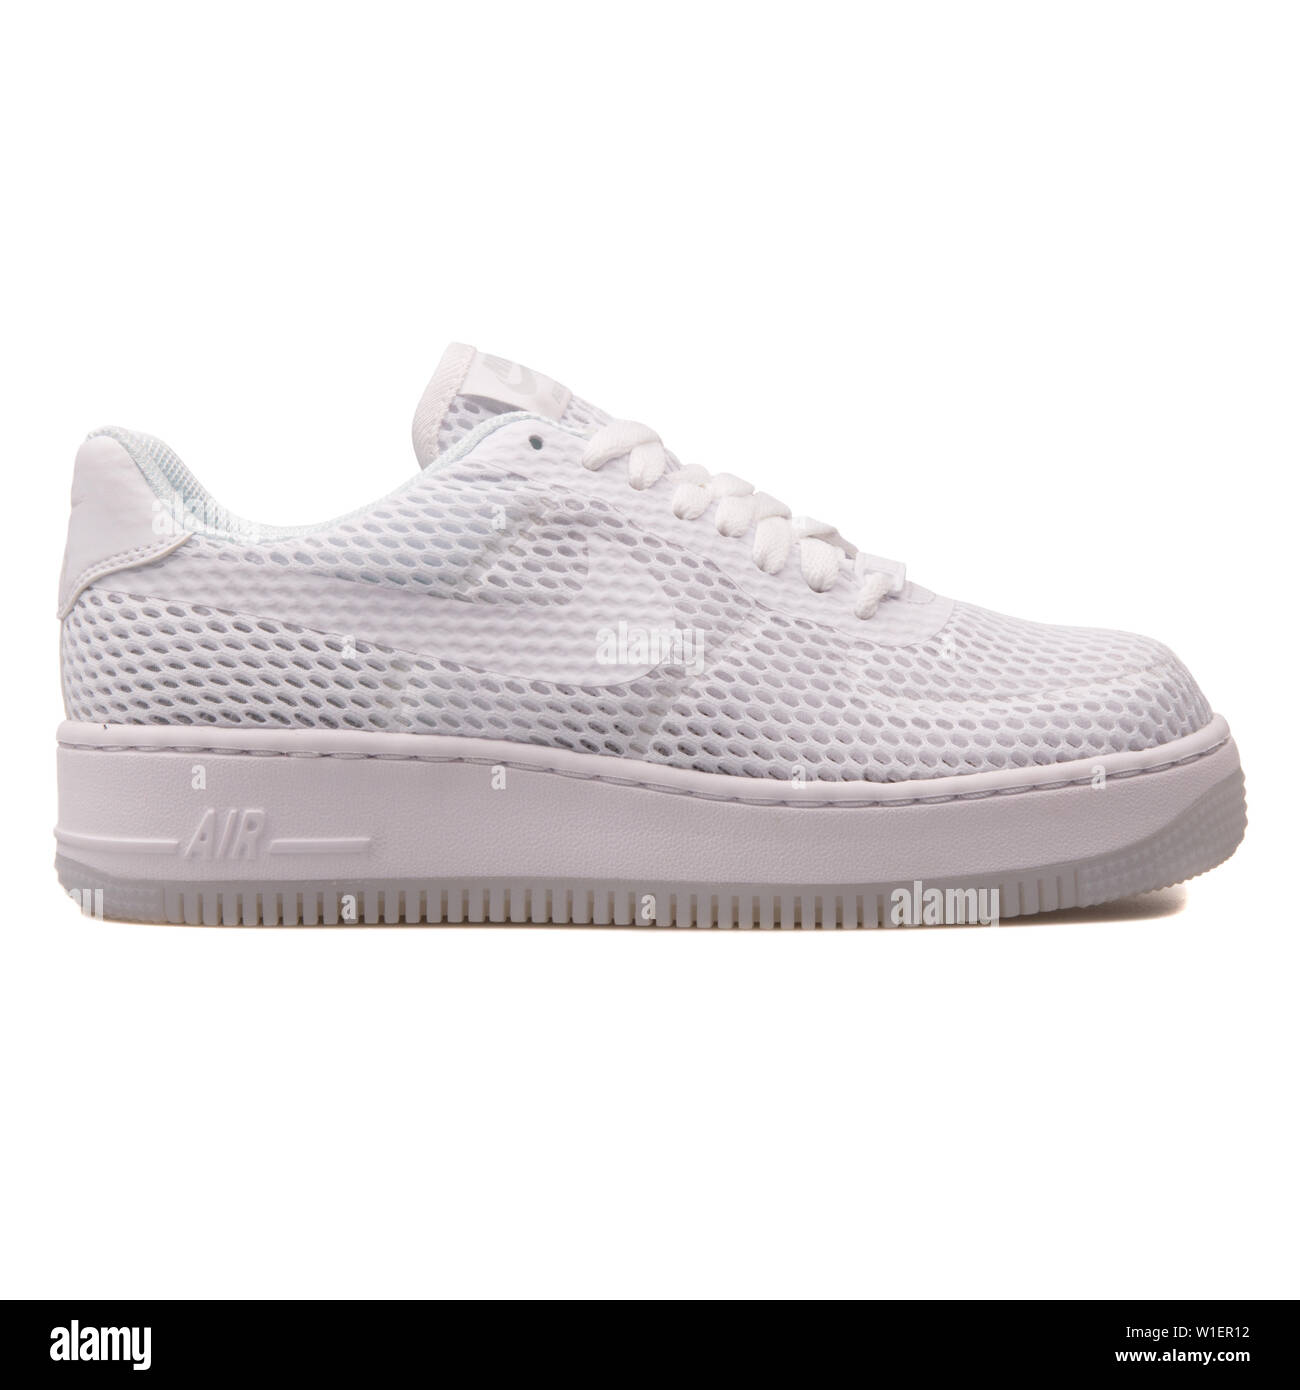 VIENNA, AUSTRIA - AUGUST 10, 2017: Nike Air Force 1 Low Upstep BR white  sneaker on white background Stock Photo - Alamy